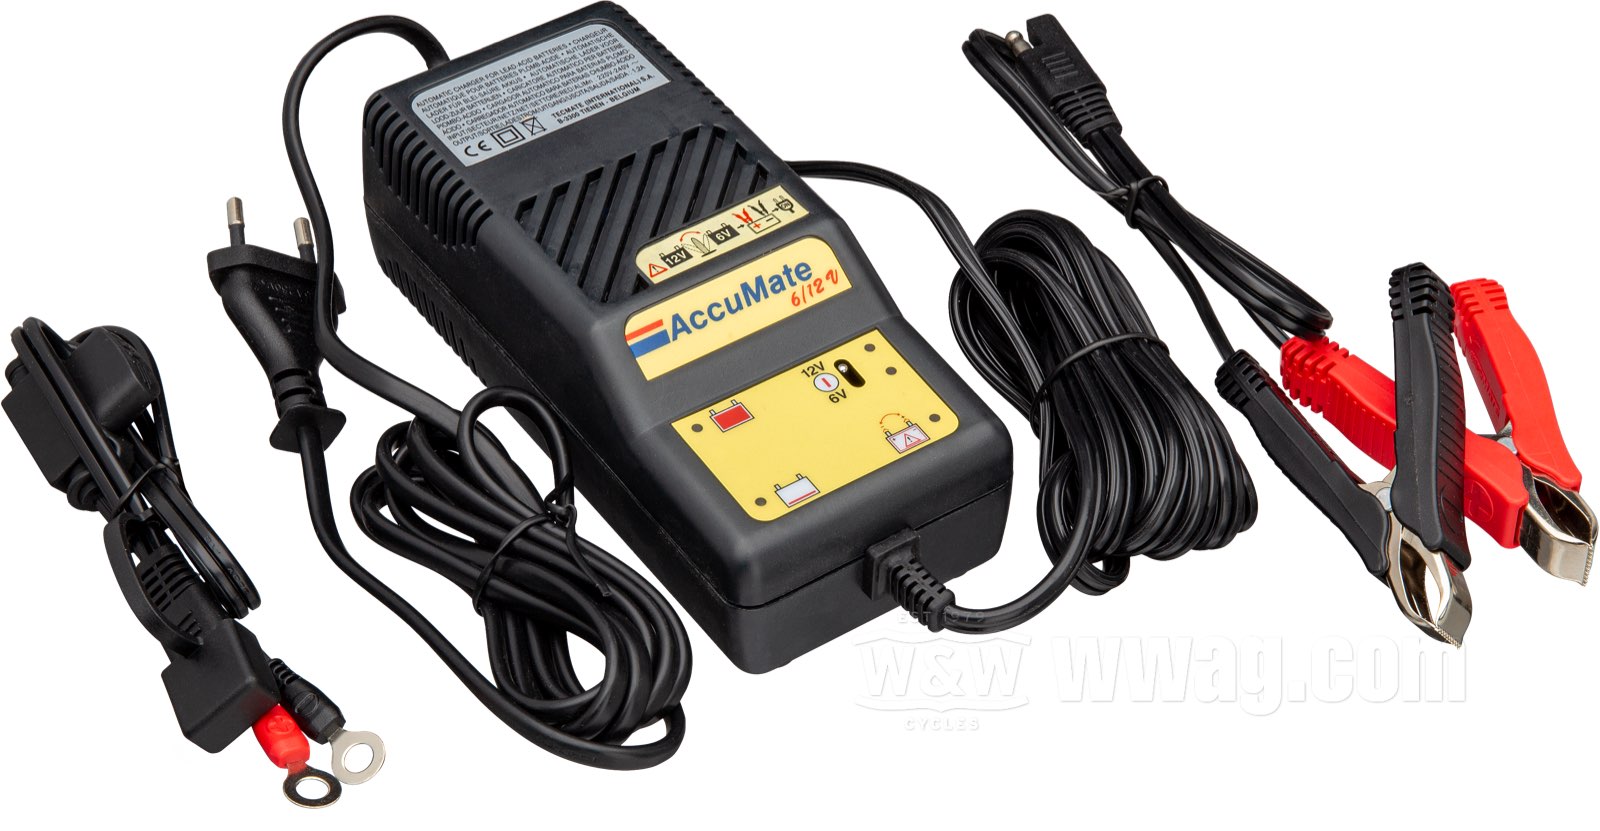 Battery Charger »AccuMATE 6/12« by Accumate